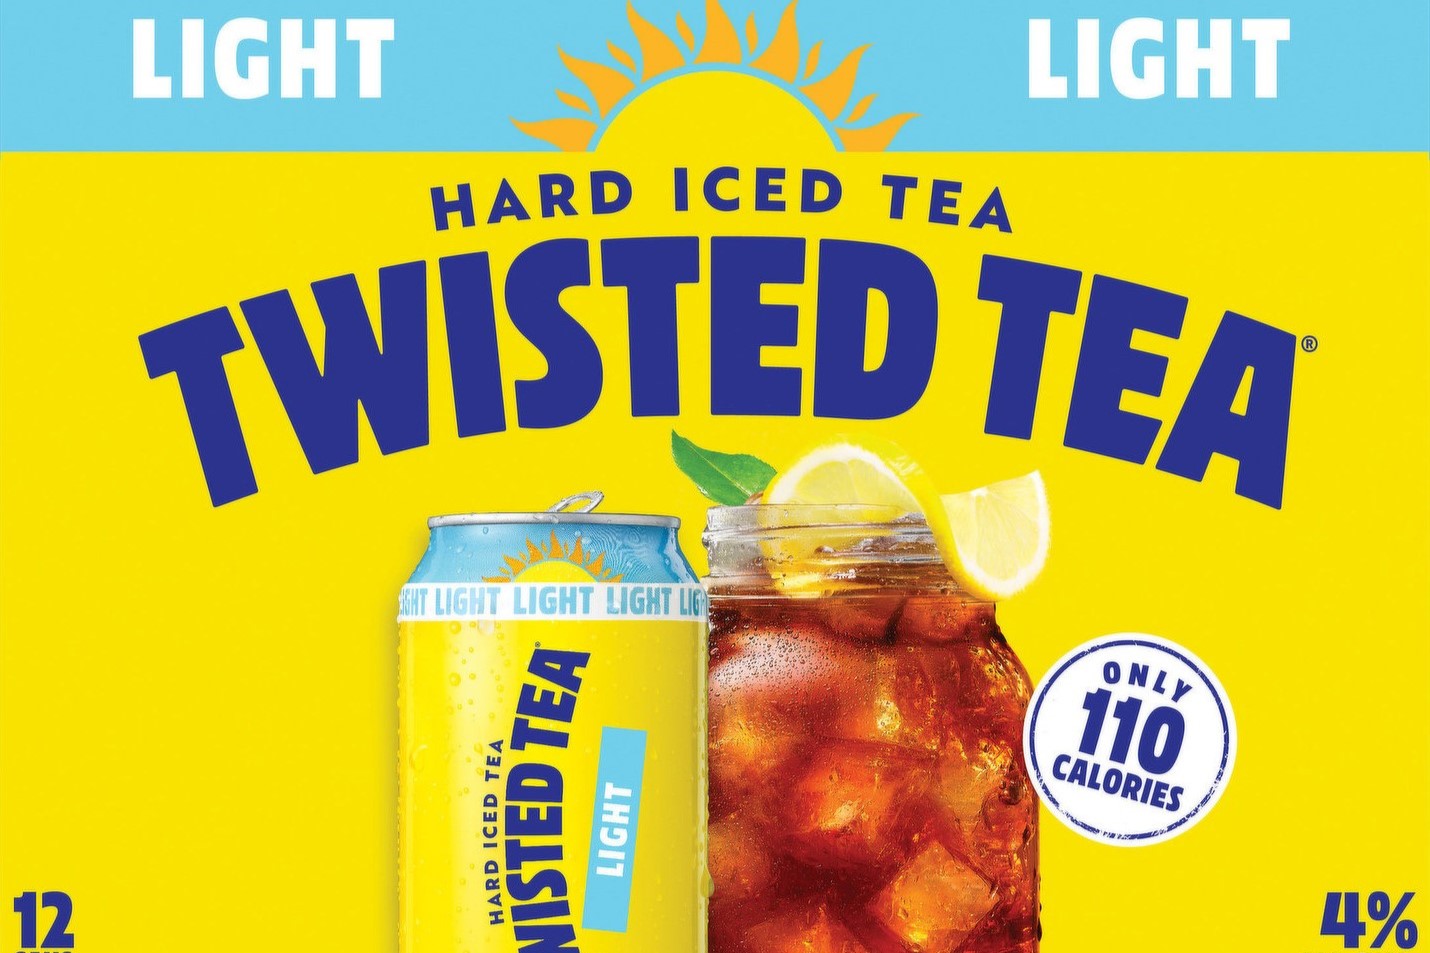 19-twisted-tea-light-nutrition-facts